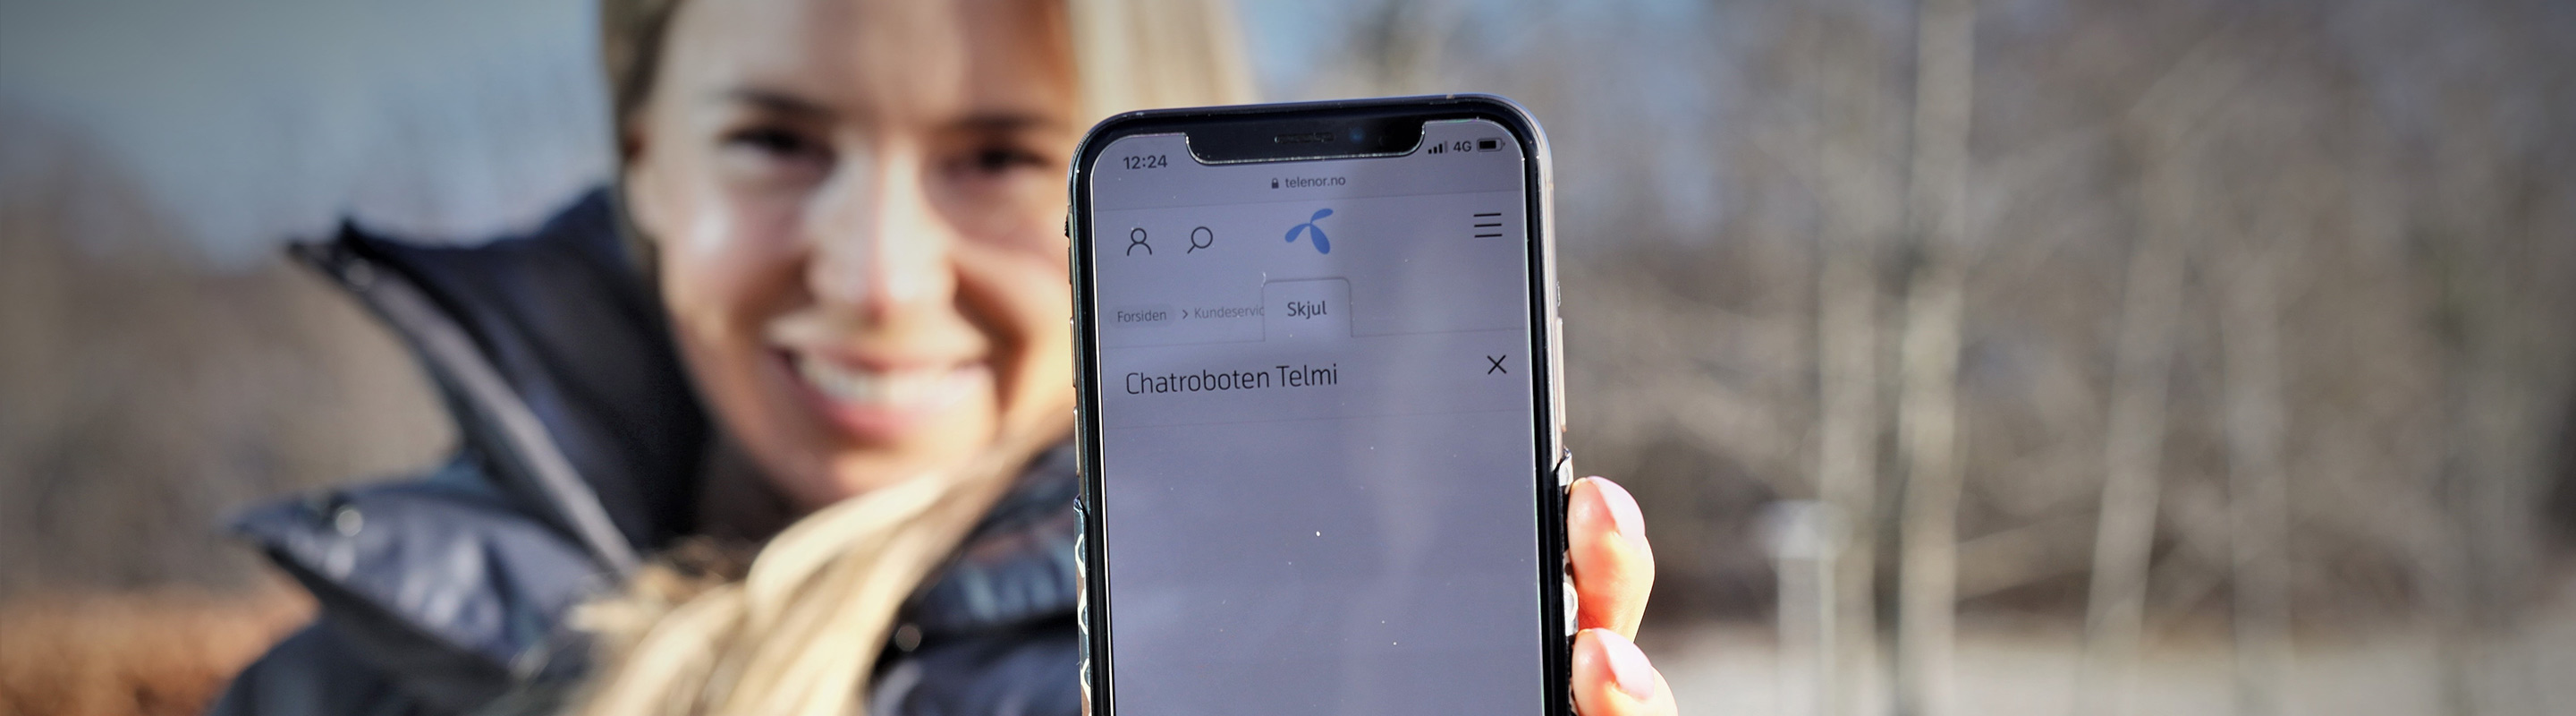 Woman holding her phone displaying the Telmi chatbot